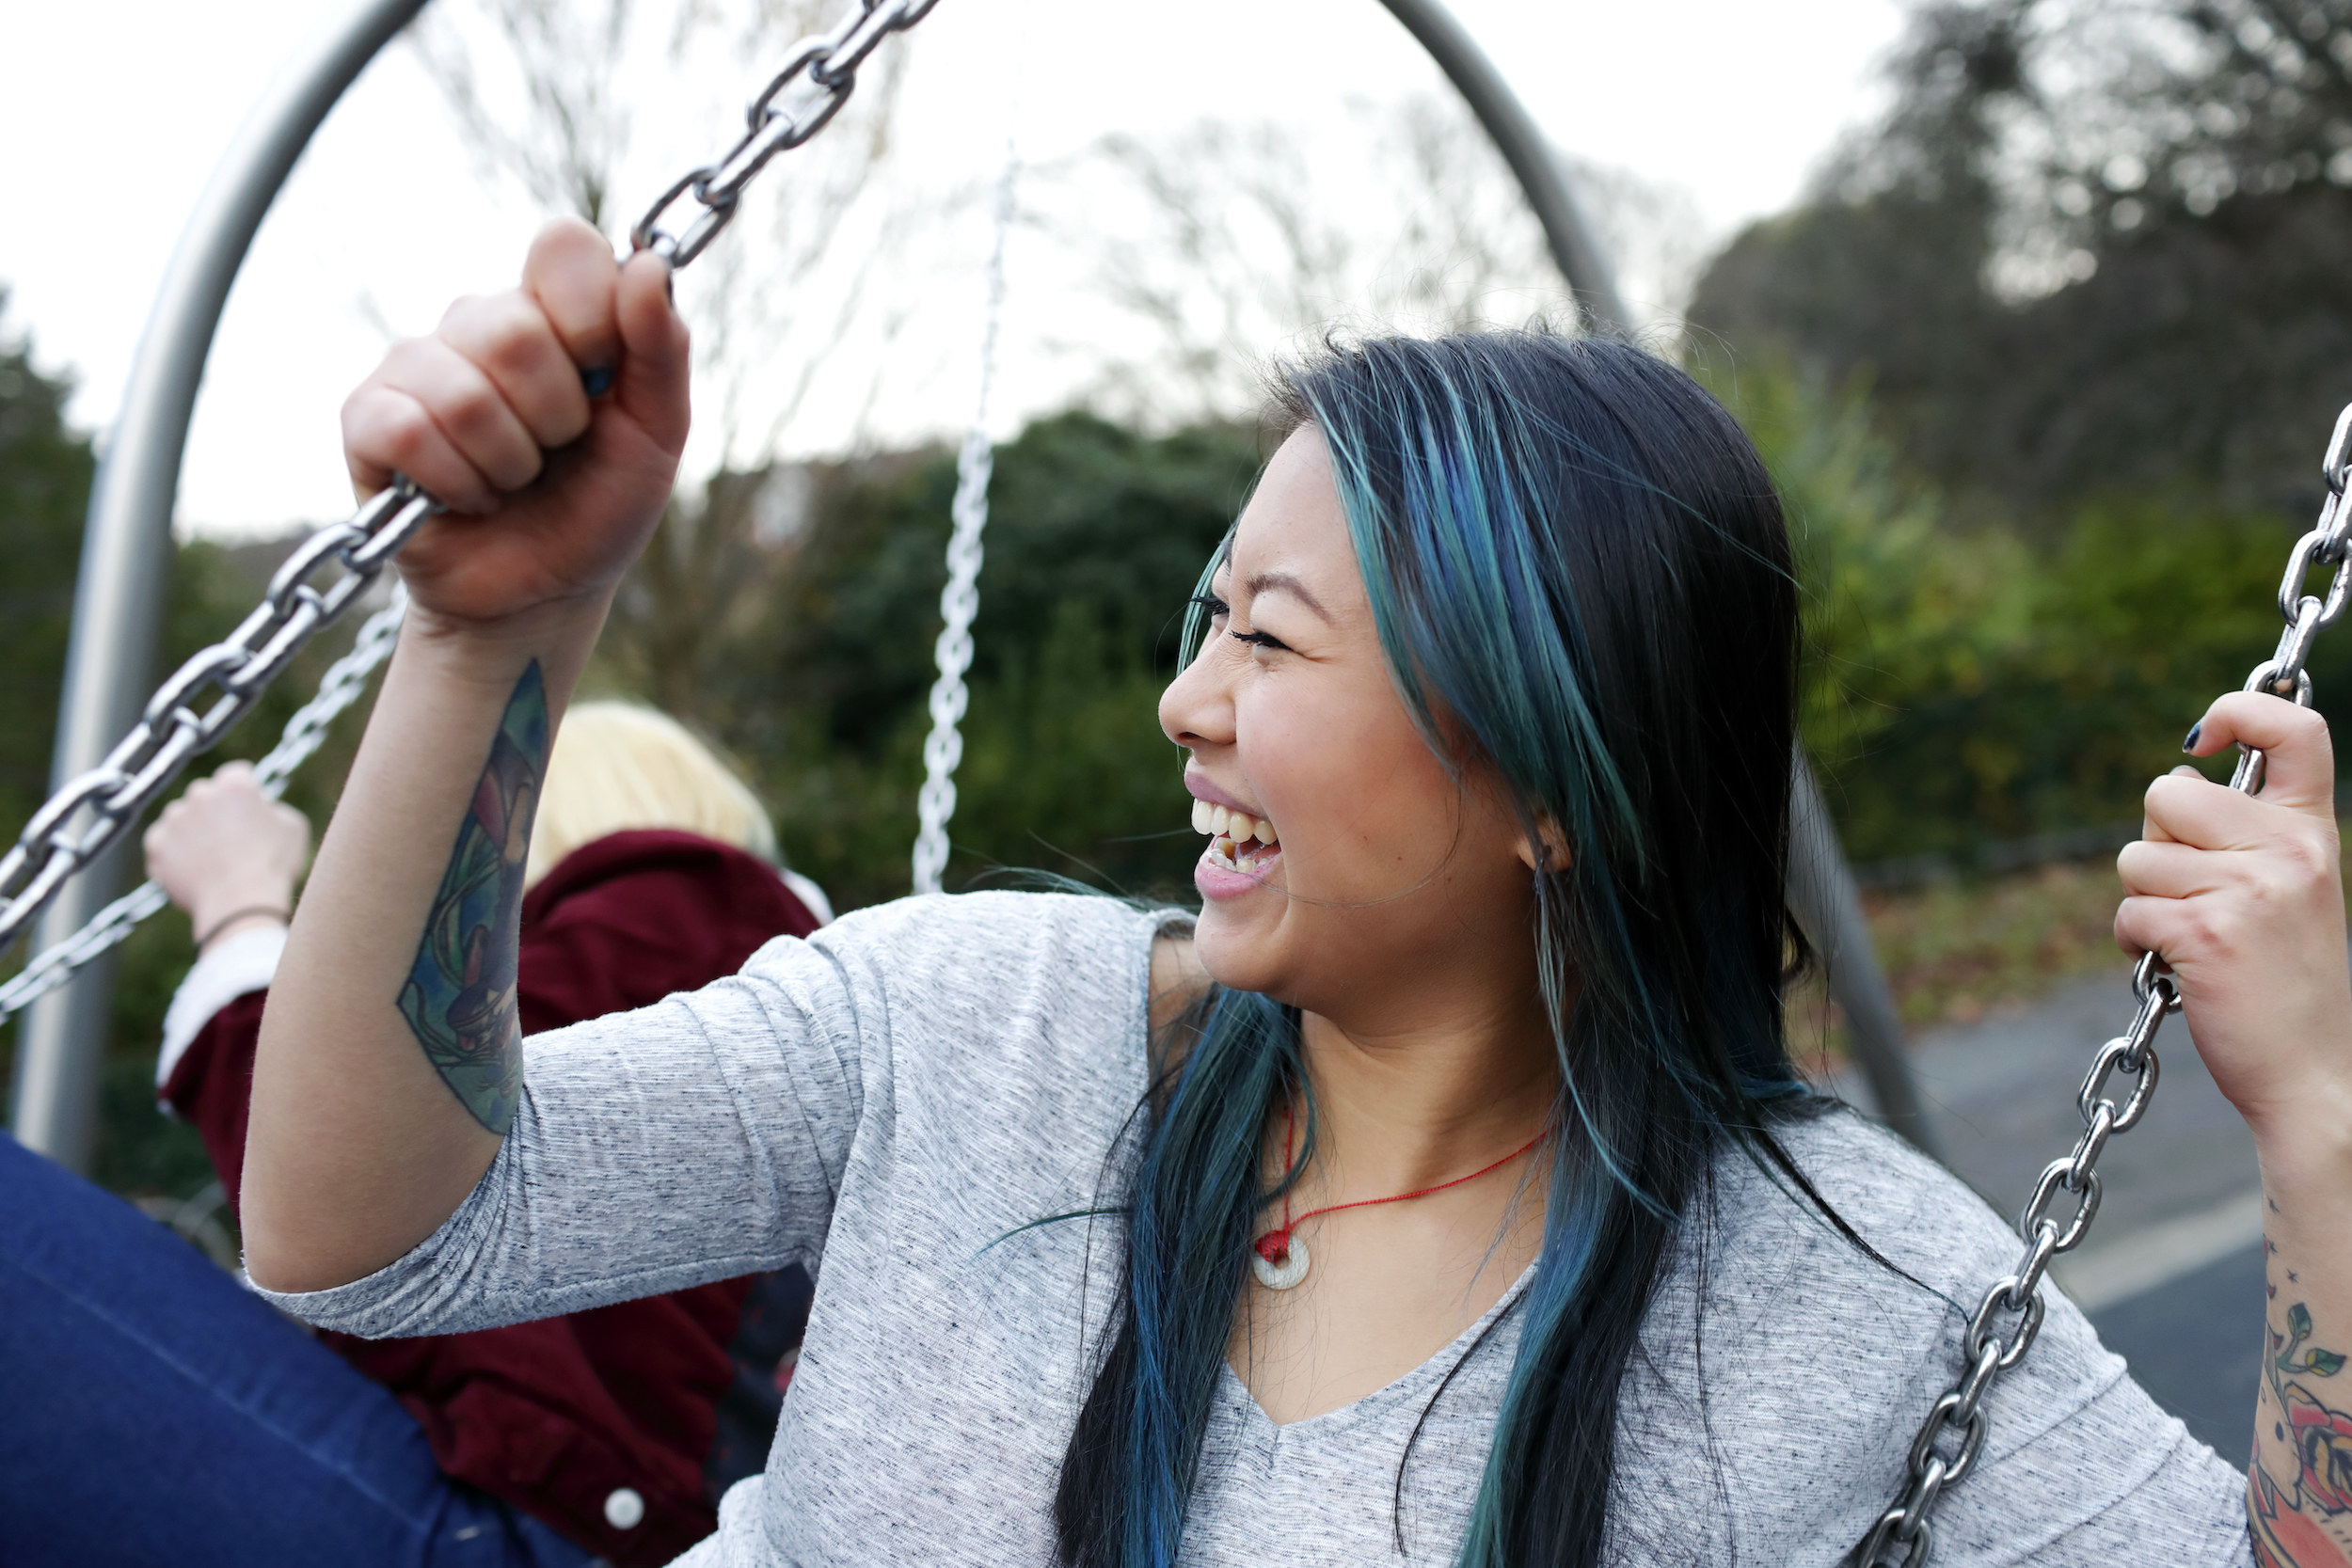 A woman with colored hair on a swing